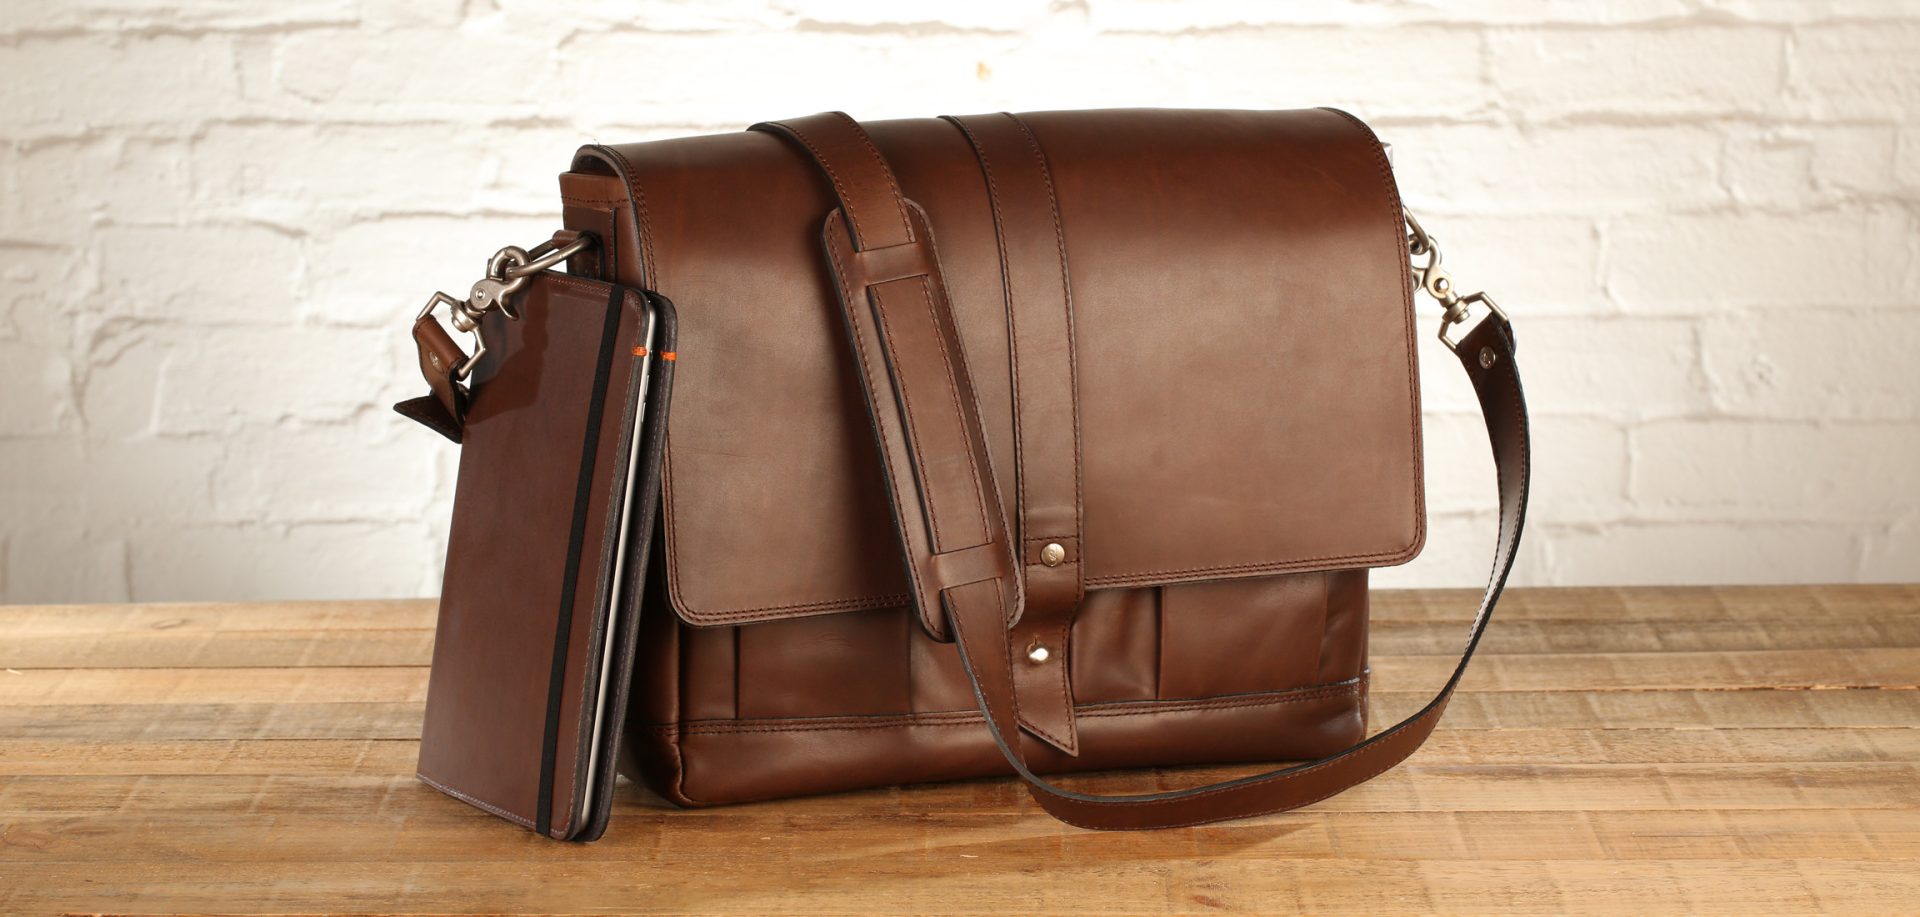 The Attache Leather Bag and Oxford case for iPad Air